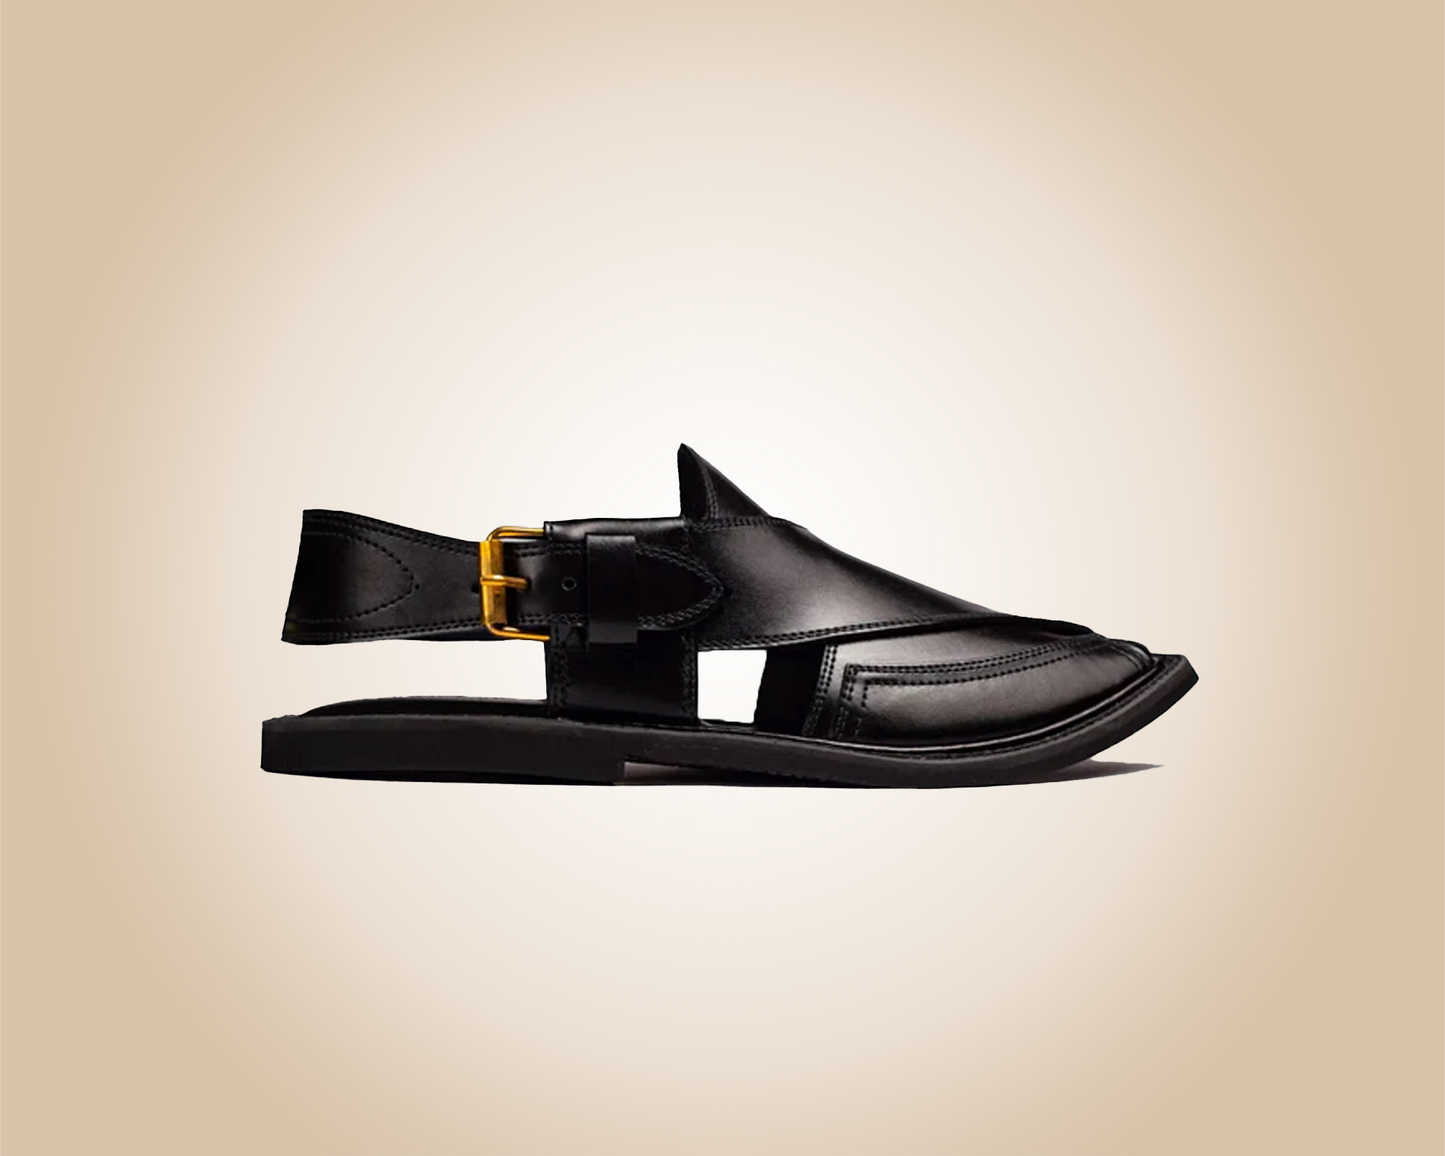 A pair of classic black Saplay sandals, known as Peshawari Chappal, with intricate leatherwork.